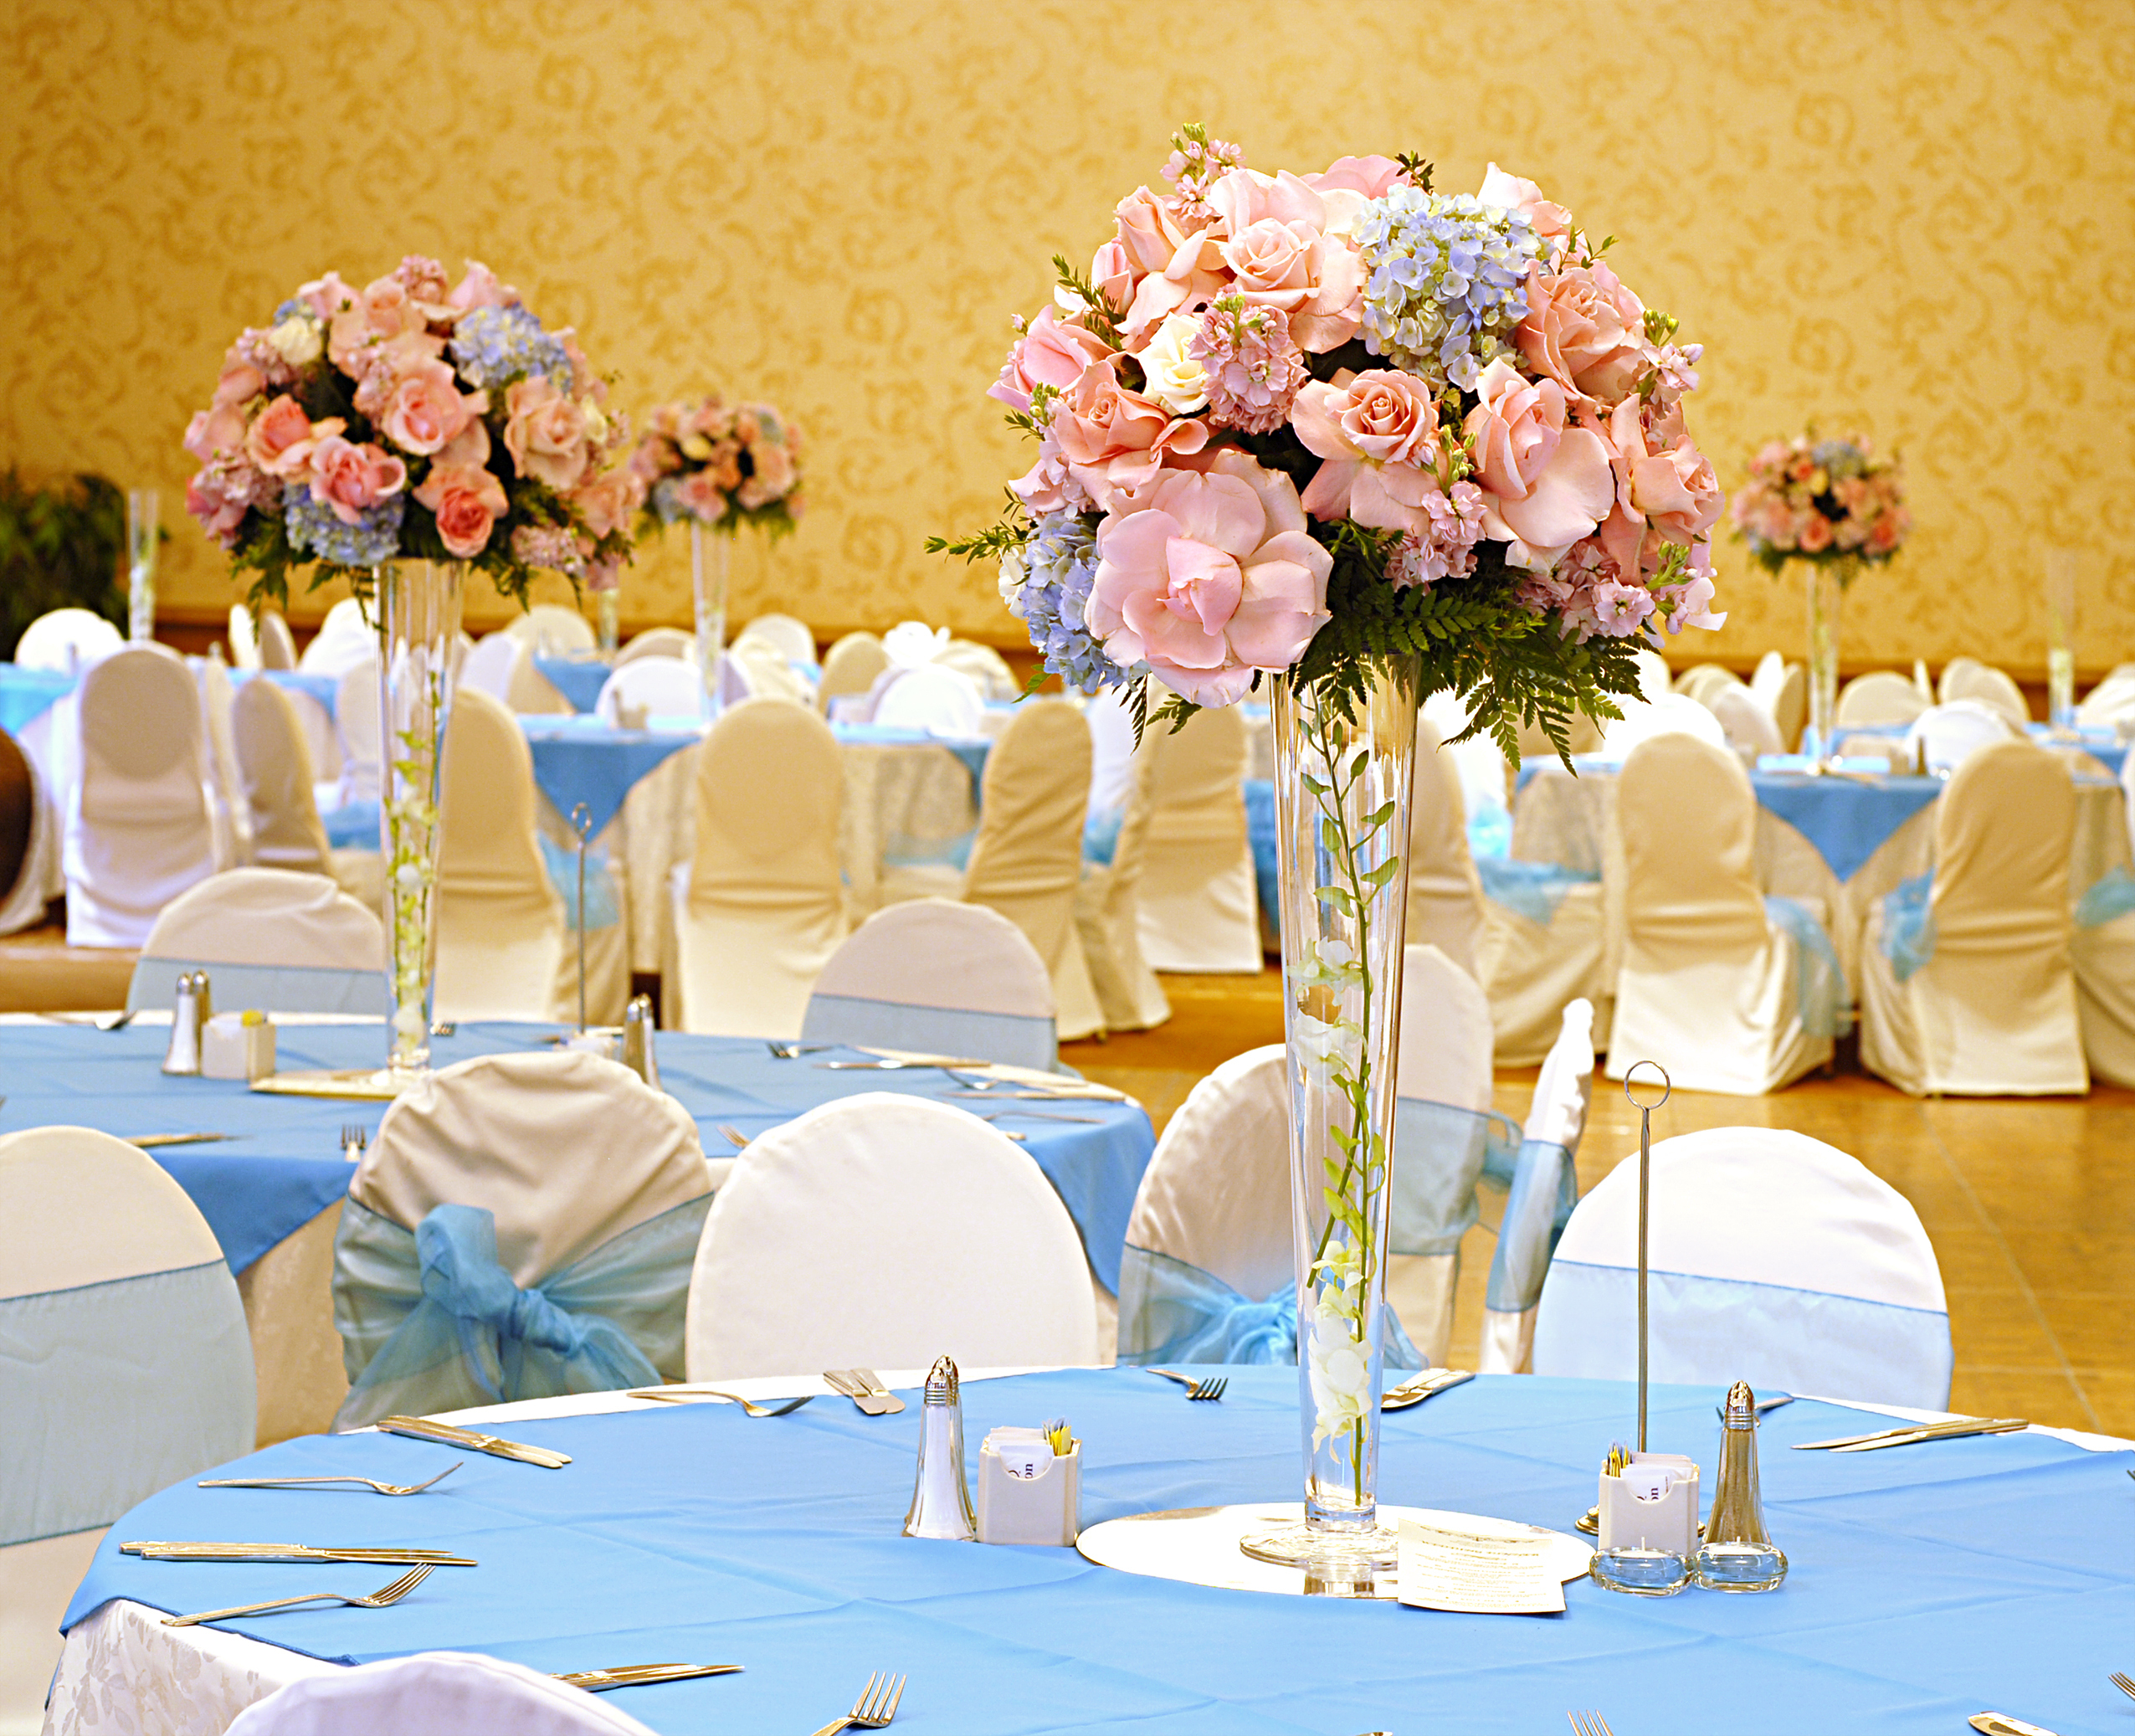 Baby blue and pastel pink flowers and decor for elegant gender reveal event